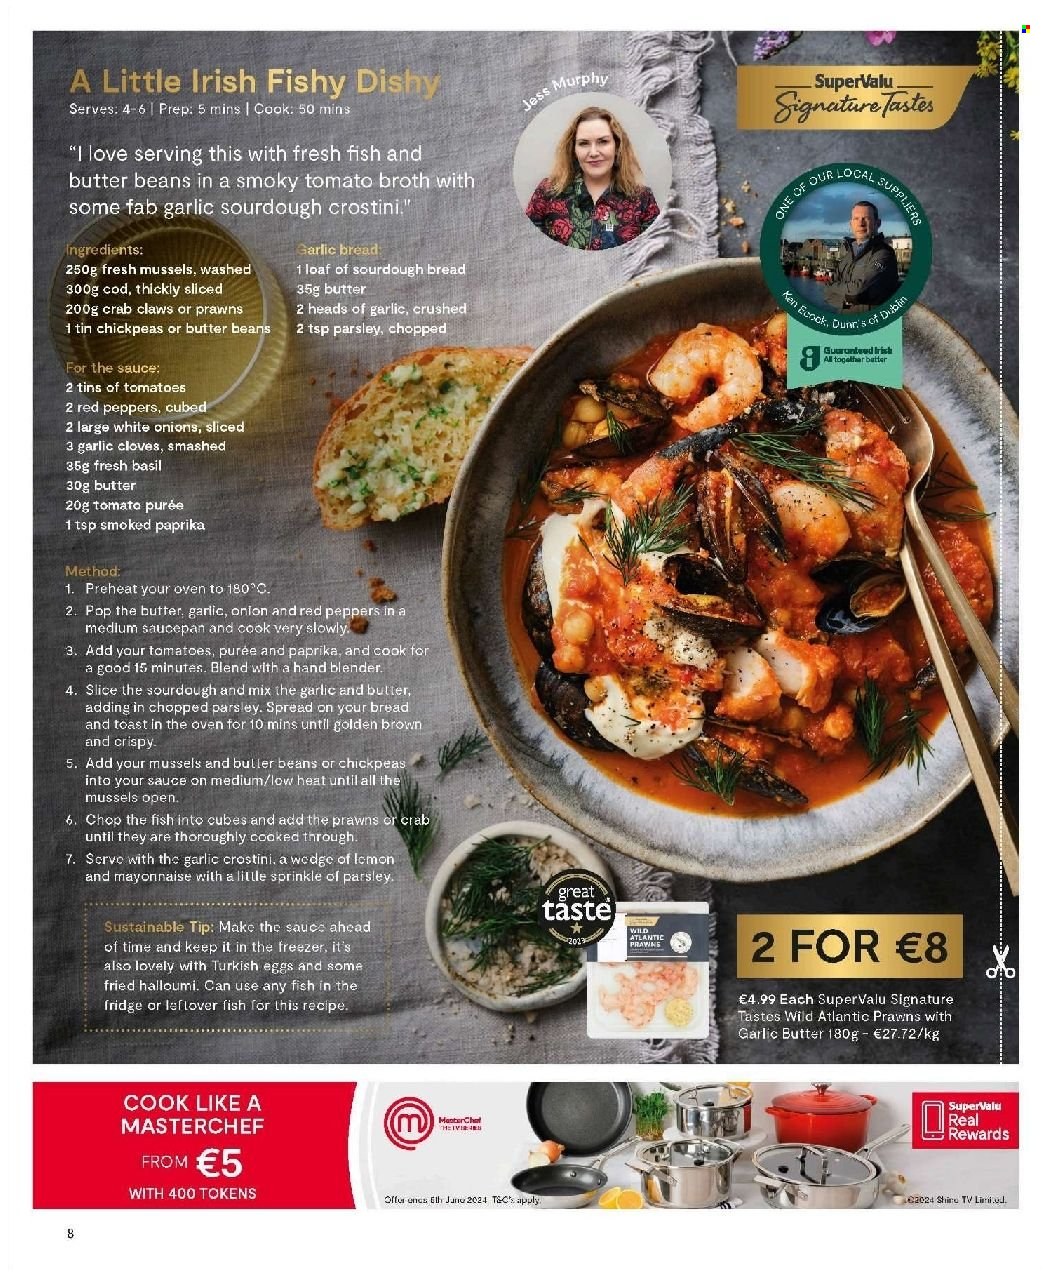 thumbnail - SuperValu offer  - Sales products - sourdough bread, pastries, tomatoes, parsley, red peppers, lemons, cod, mussels, prawns, crab, crushed garlic, halloumi, cheese, grilling cheese, mayonnaise, garlic sourdough, broth, tomato sauce, tomato puree, basil, Fab, eggs. Page 8.